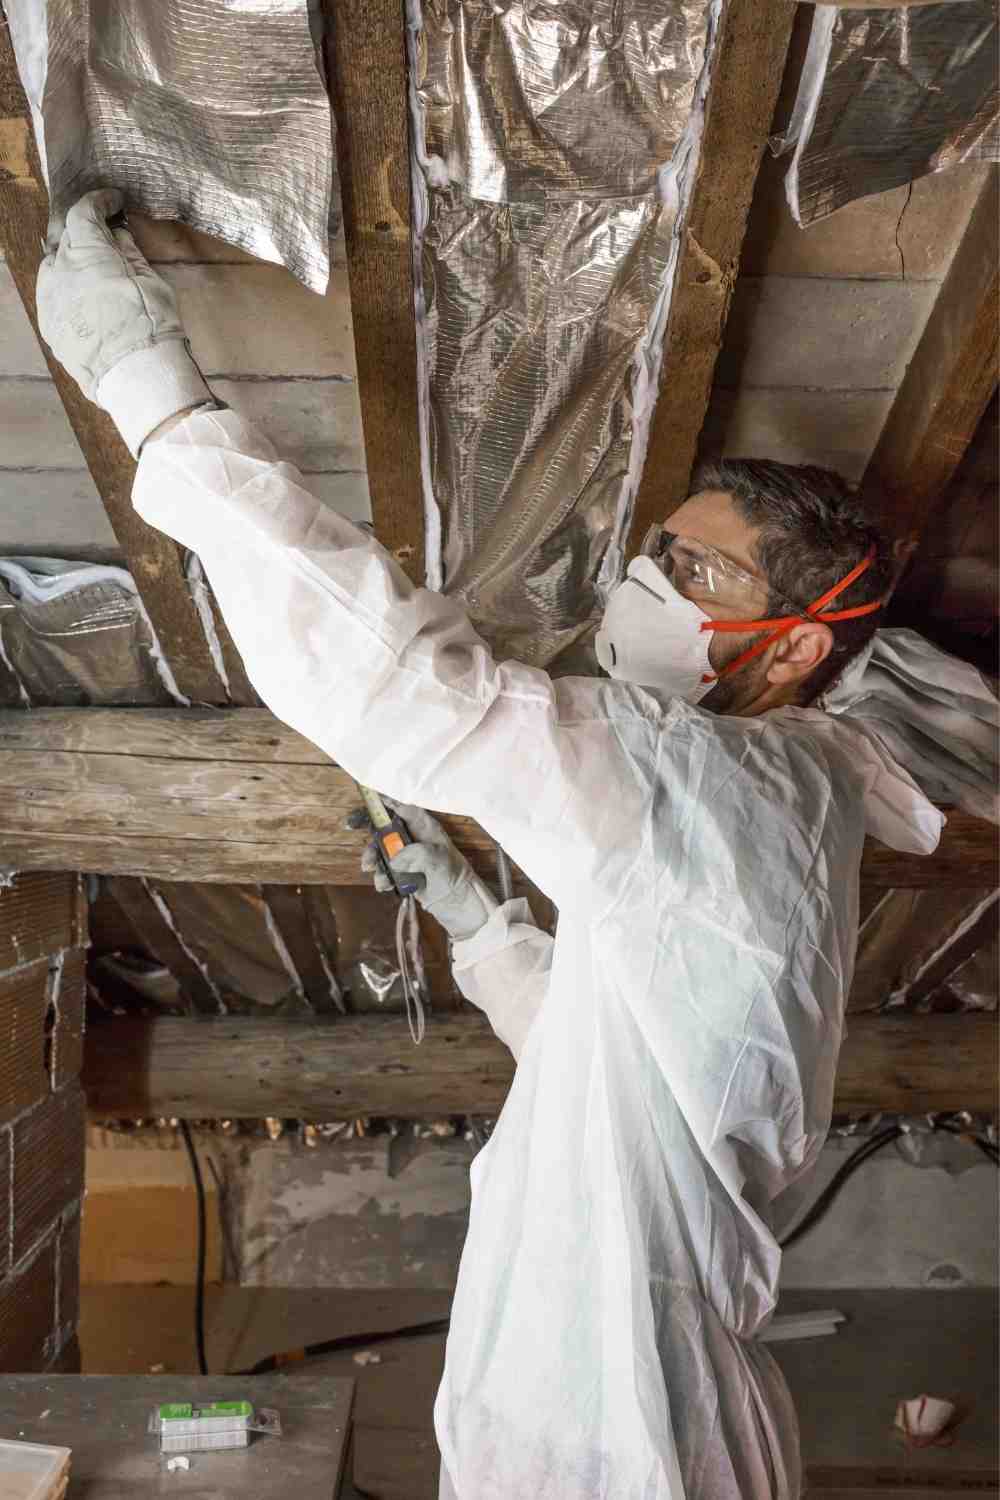 Use home insulation